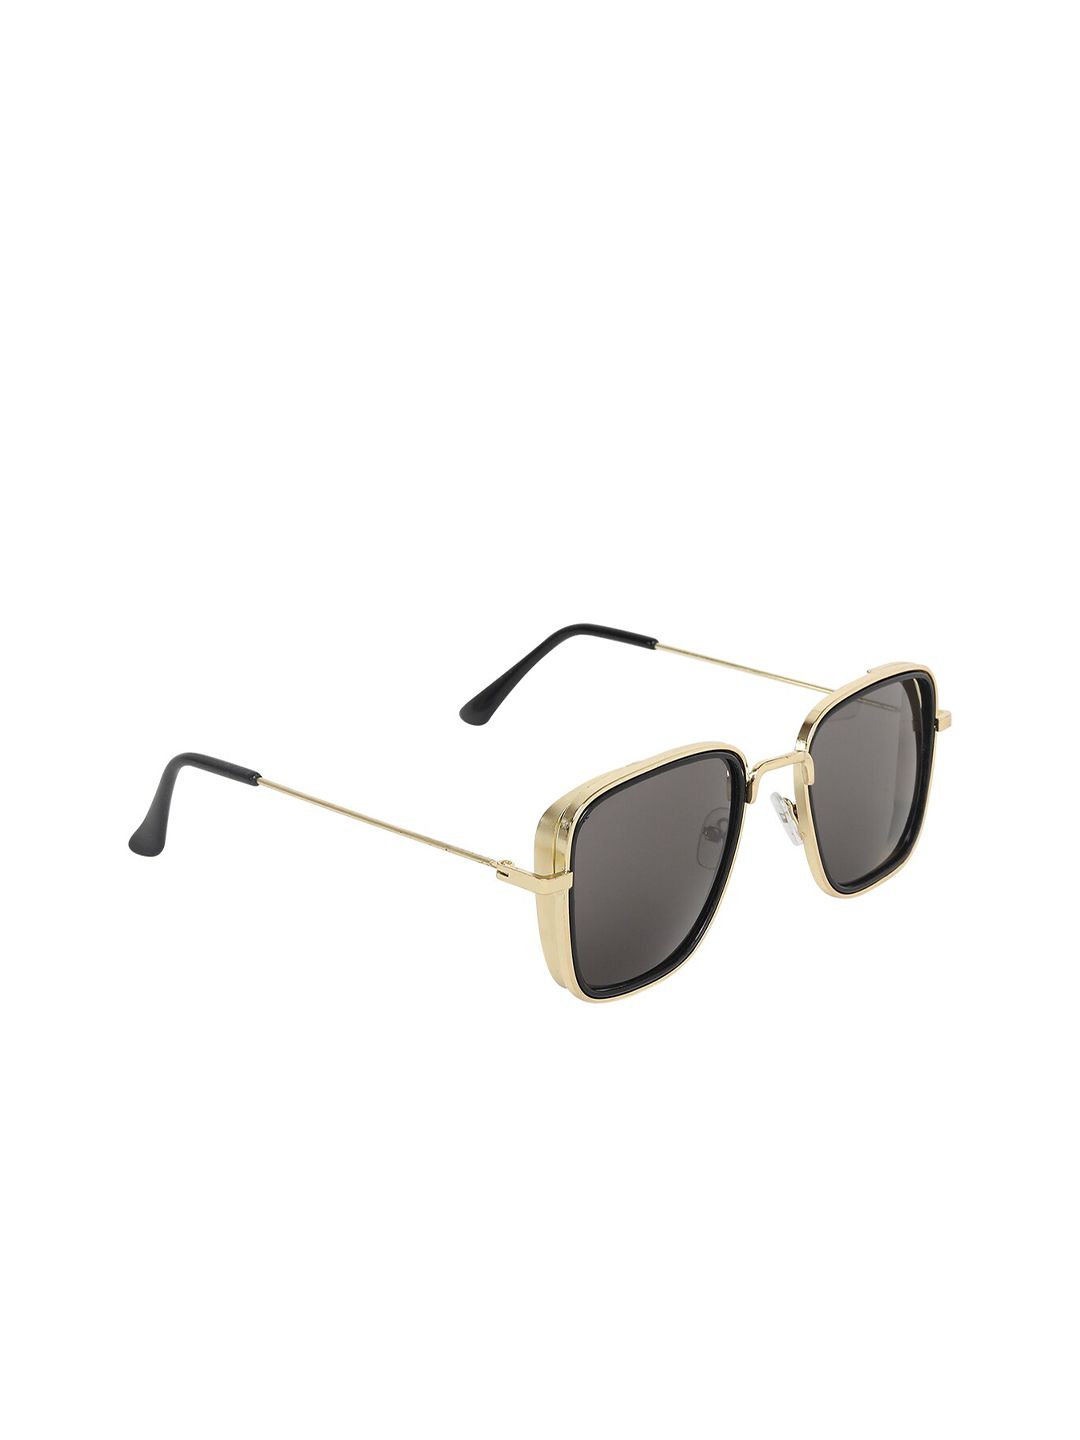 CRIBA Unisex Black & Gold-Toned Kabir Singh Square Sunglasses with UV Protected Lens GOLD Price in India